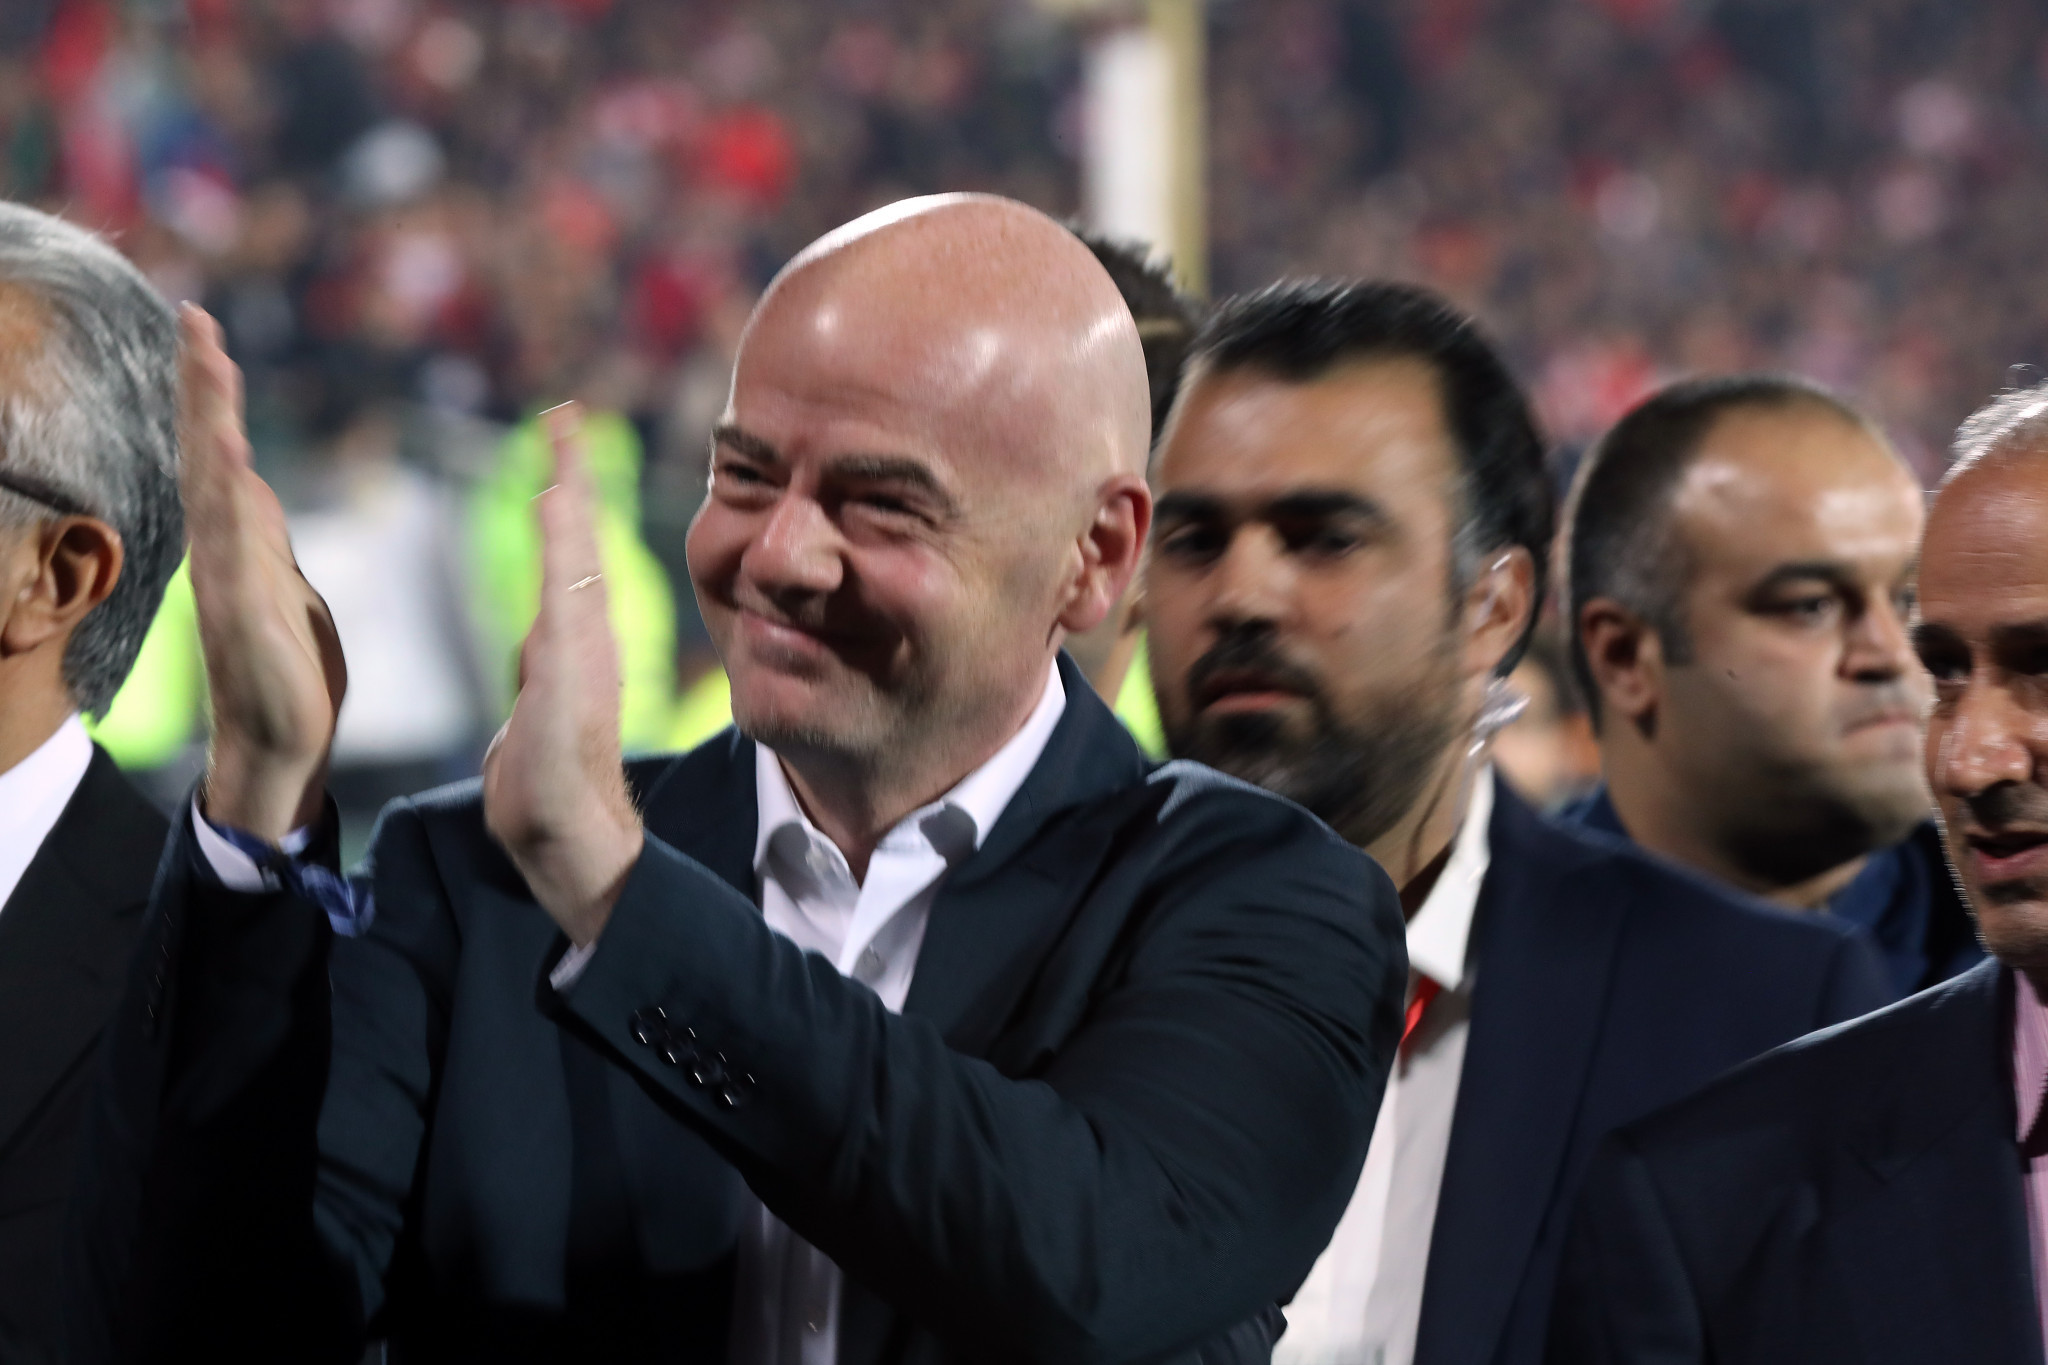 Gianni Infantino attends the Asian Champions League final in Iran ©Getty Images